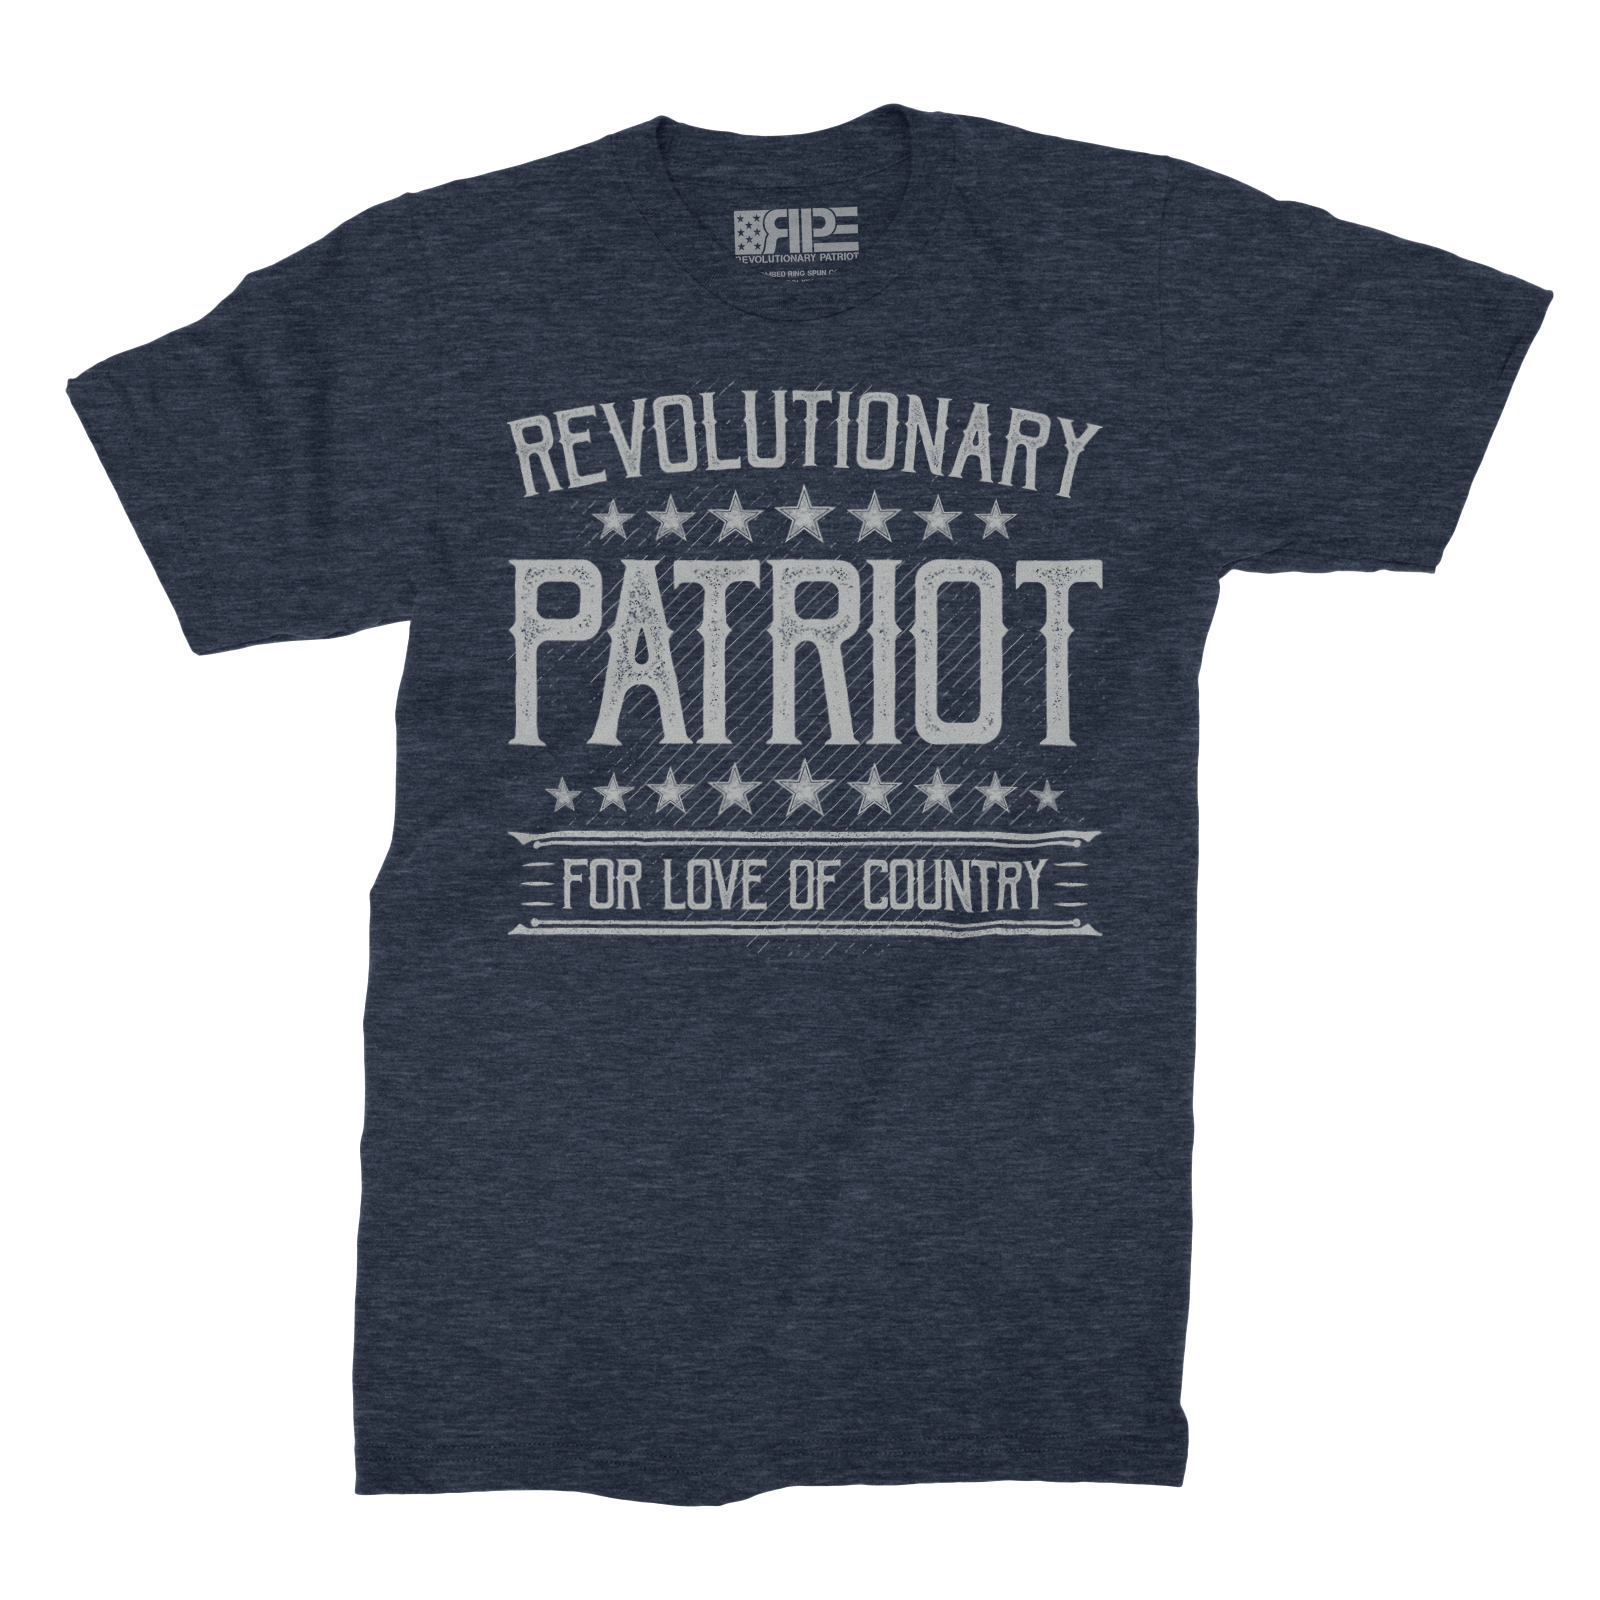 For Love of Country (Heather Midnight Navy) - Revolutionary Patriot